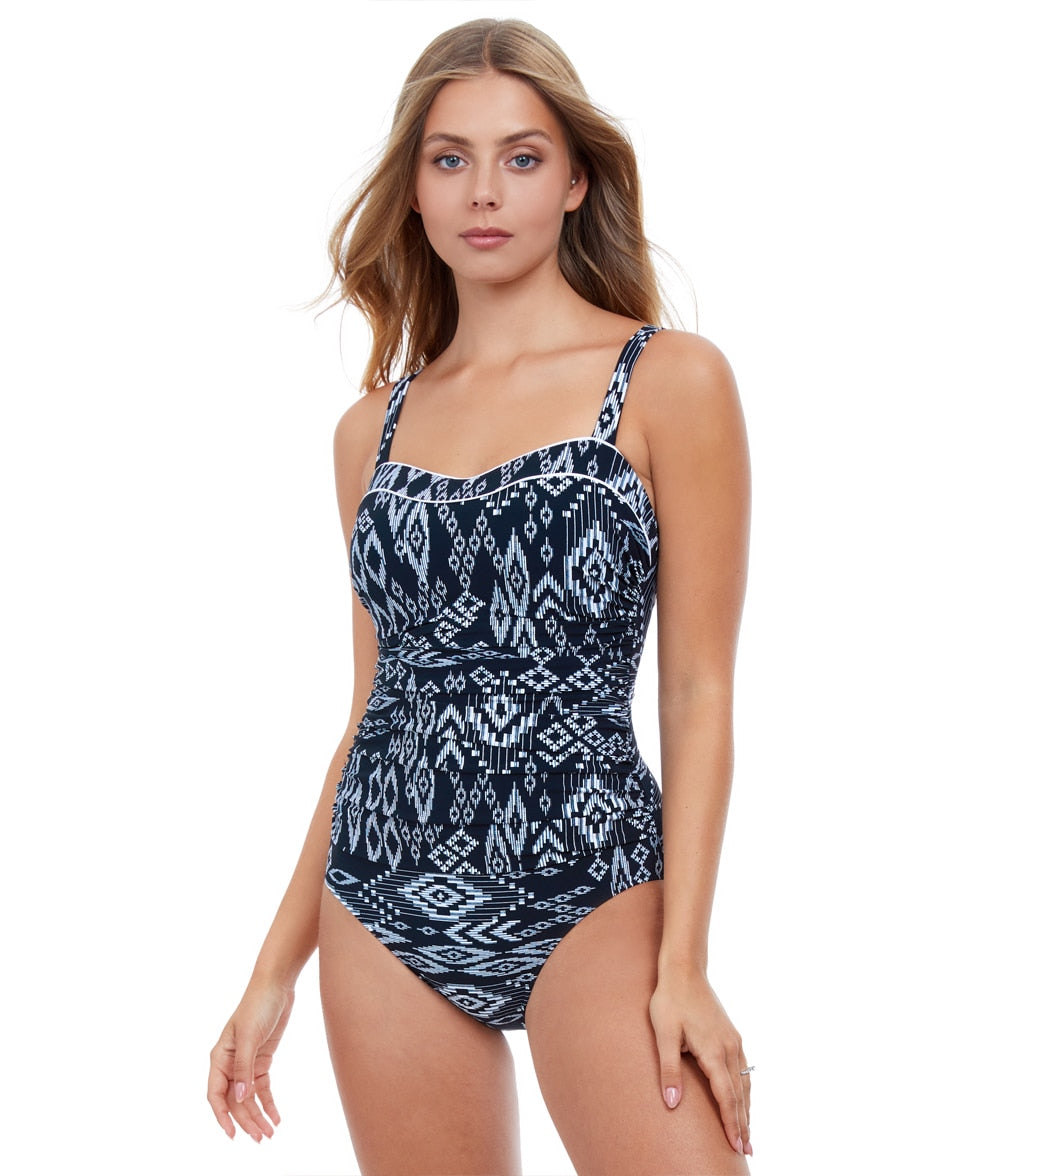 Profile by Gottex Woman's Peruvian Nights One Piece Swimsuit (D Cup) at